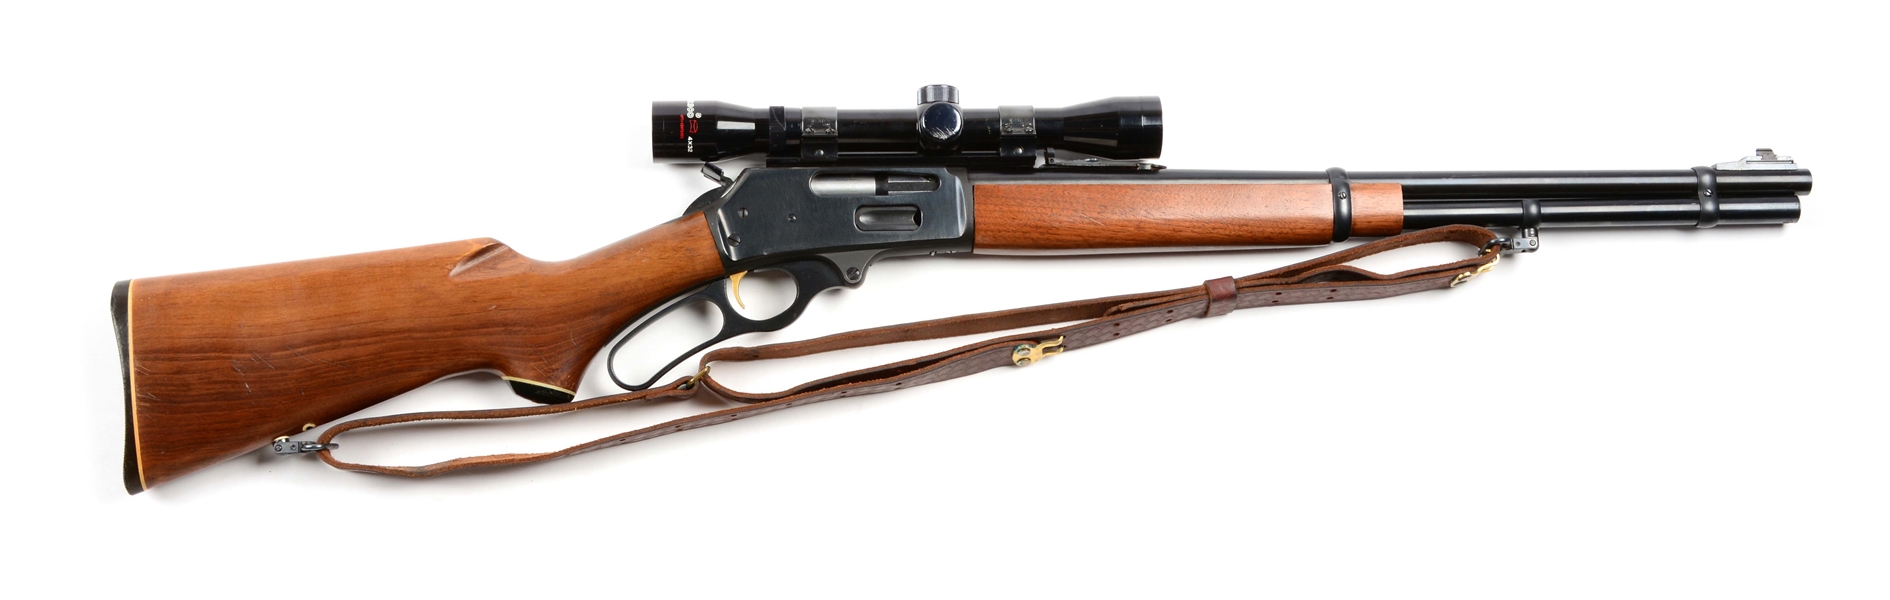 (M) MARLIN MODEL 336 LEVER ACTION RIFLE WITH SCOPE.